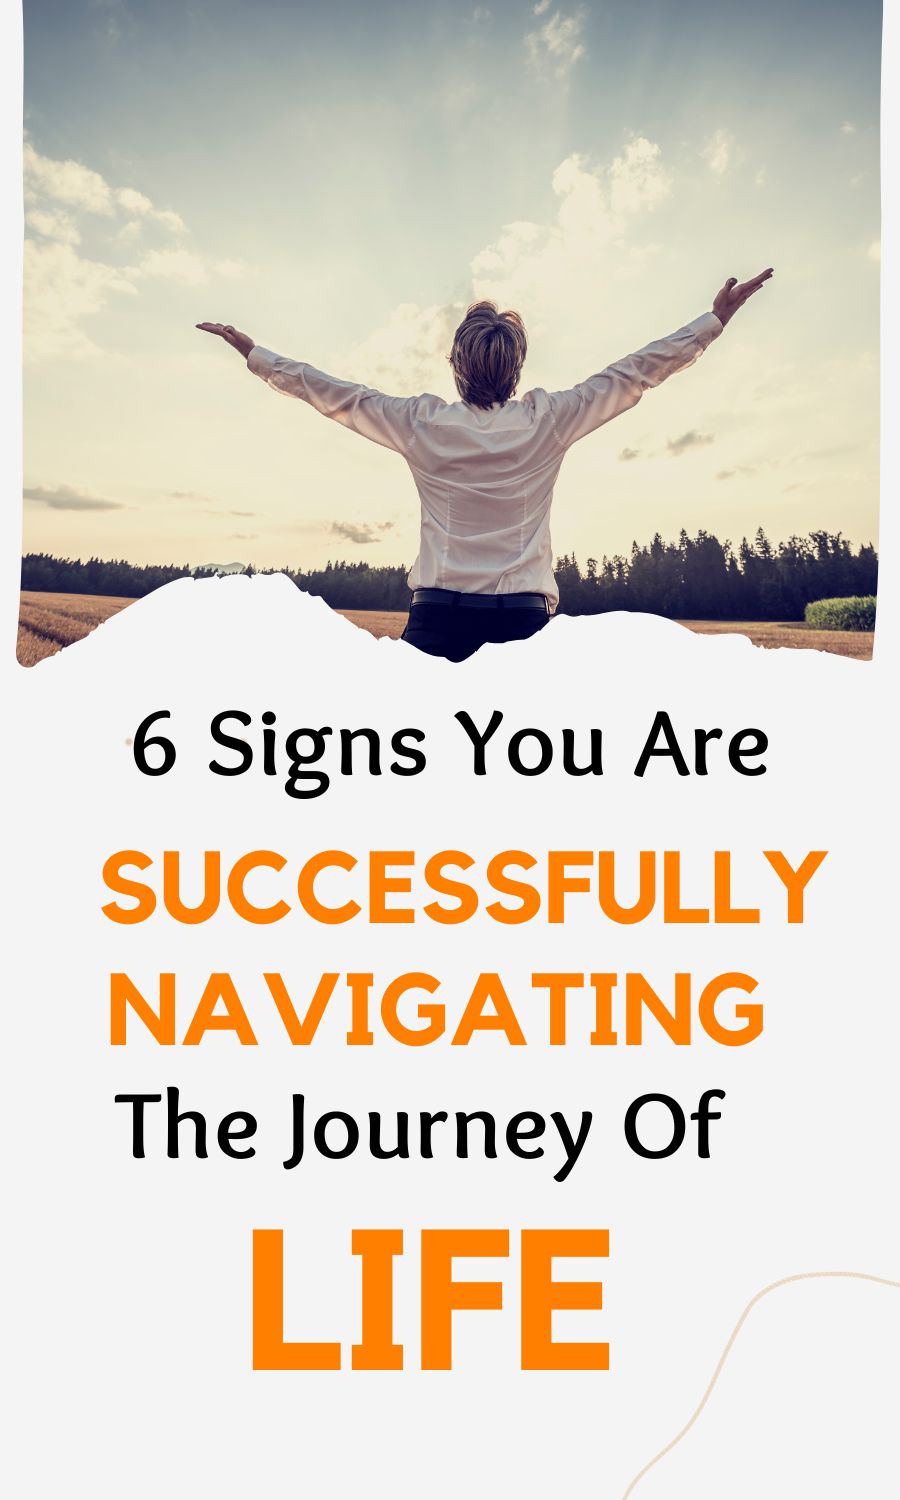 Signs You Are Successfully Navigating the Journey of Life